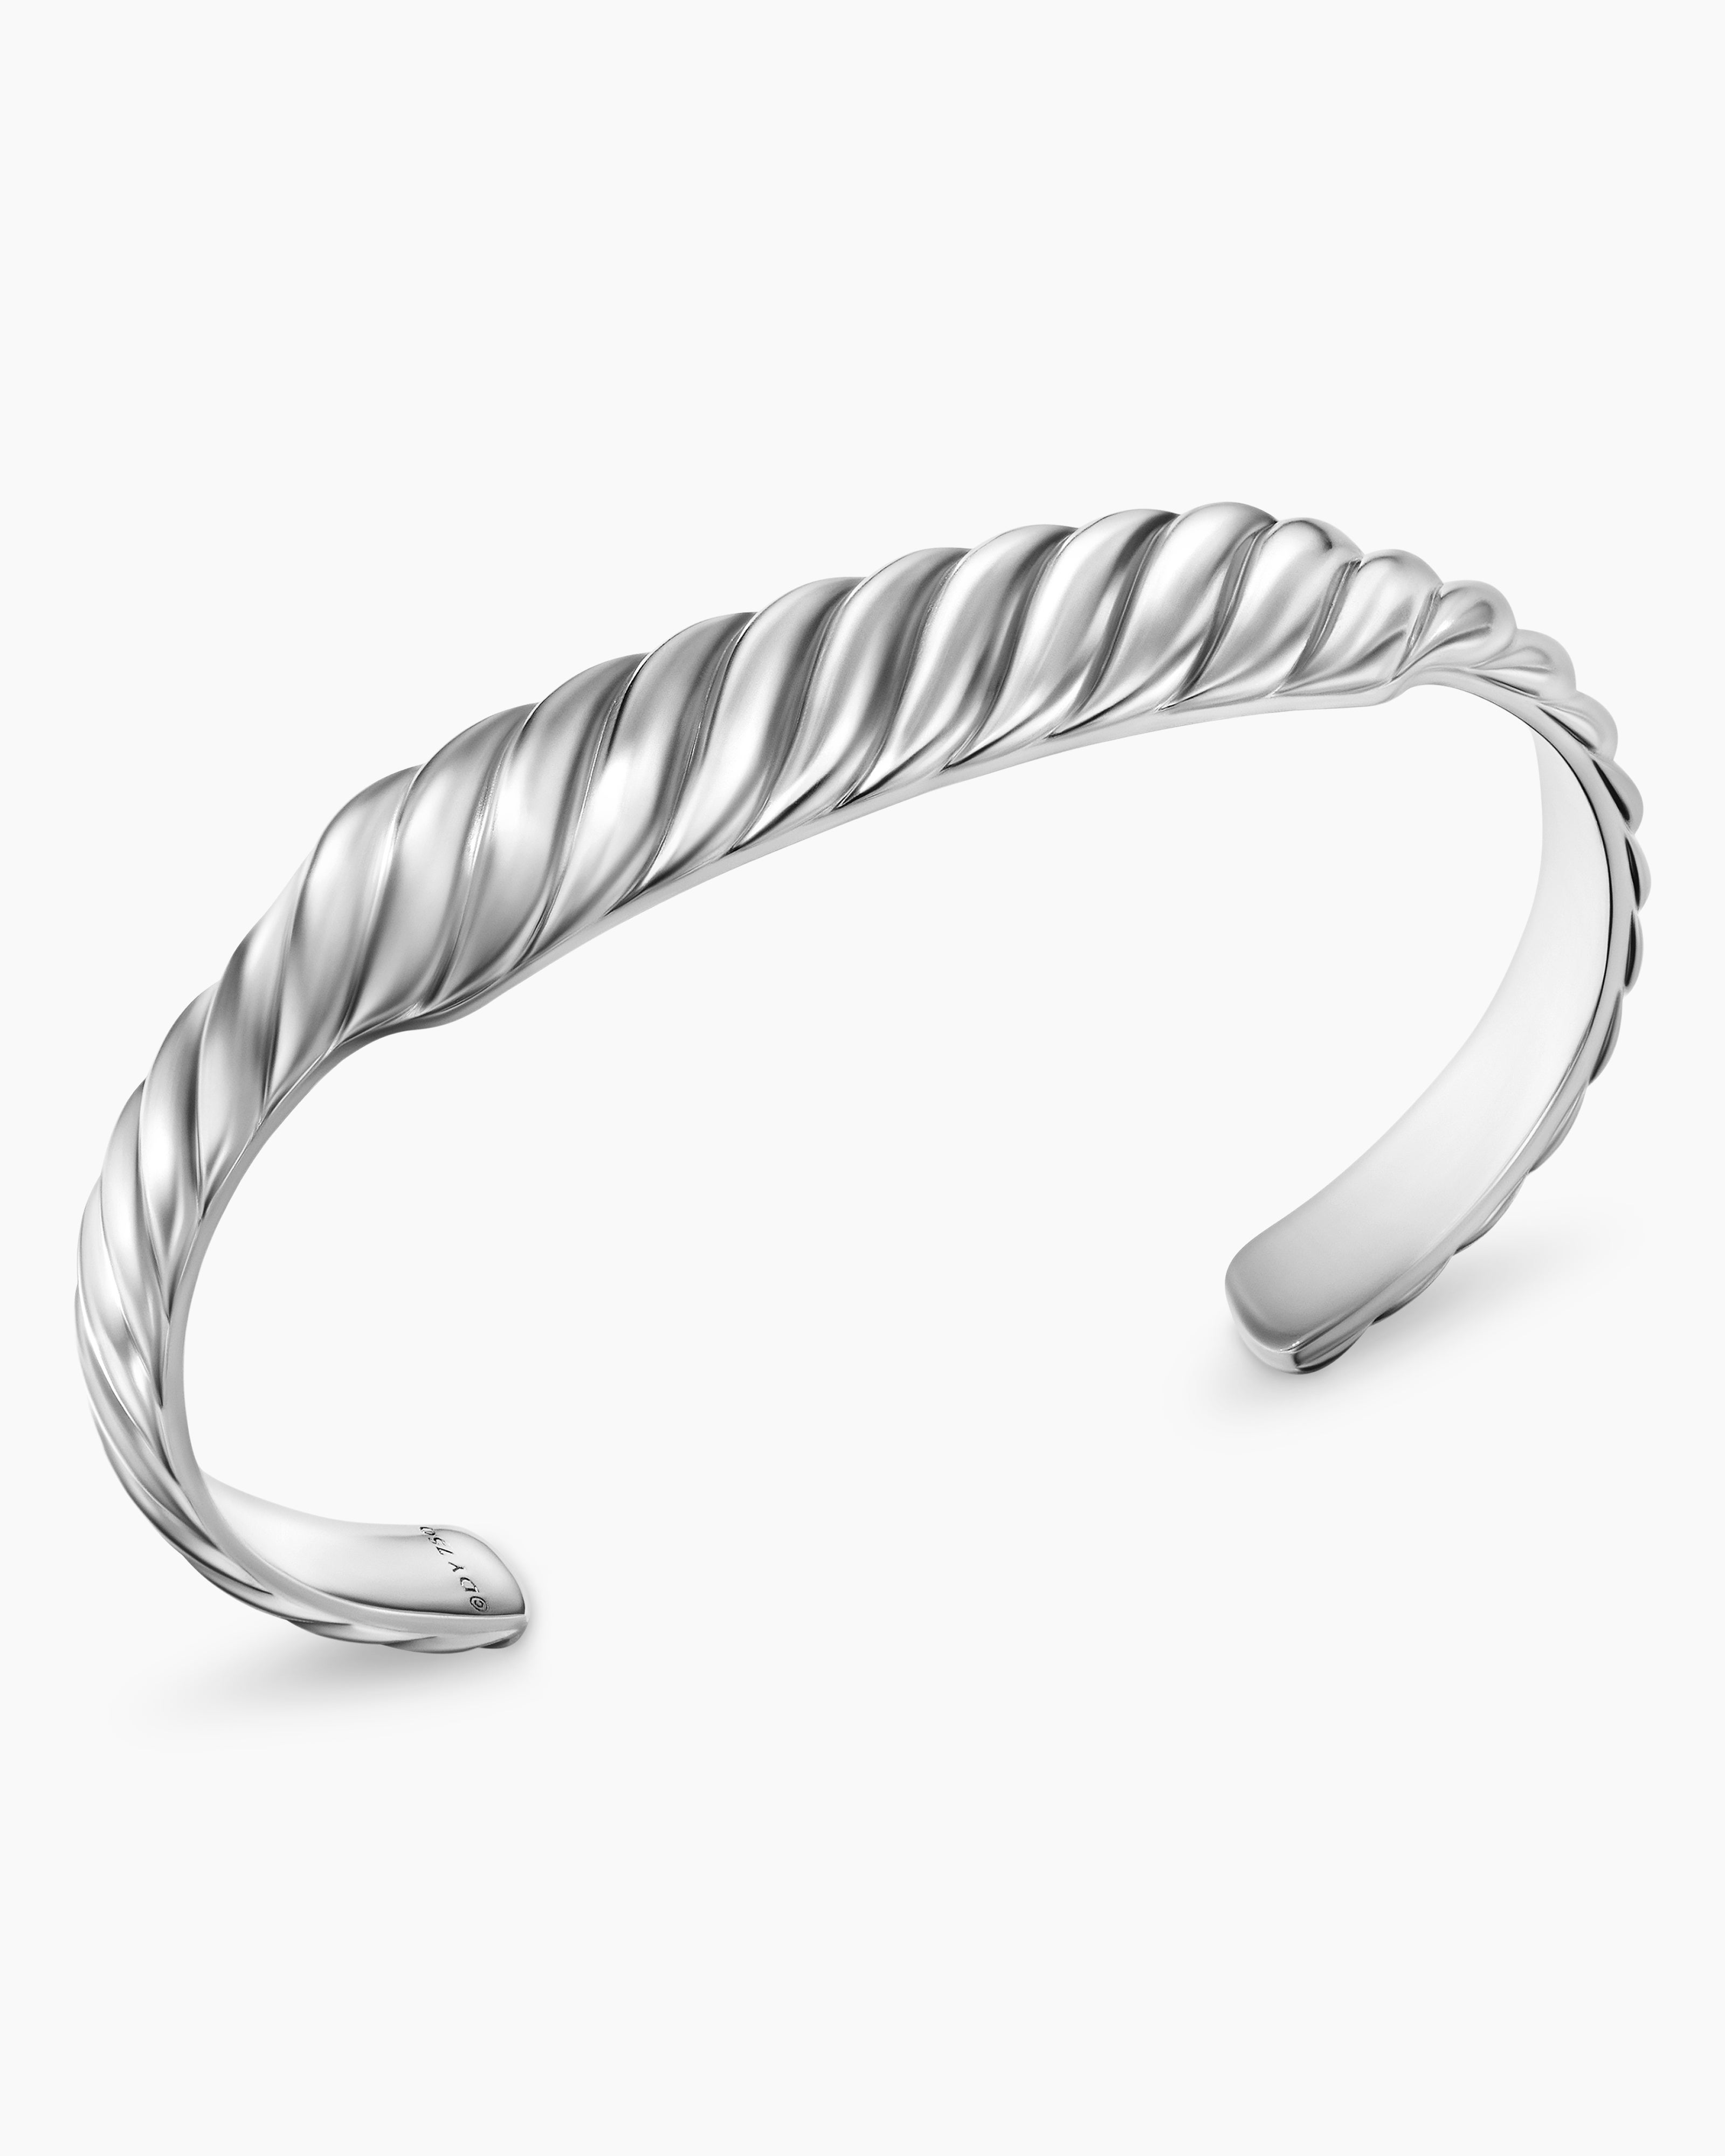 Cable Cuff Bracelet in Sterling Silver, 6mm